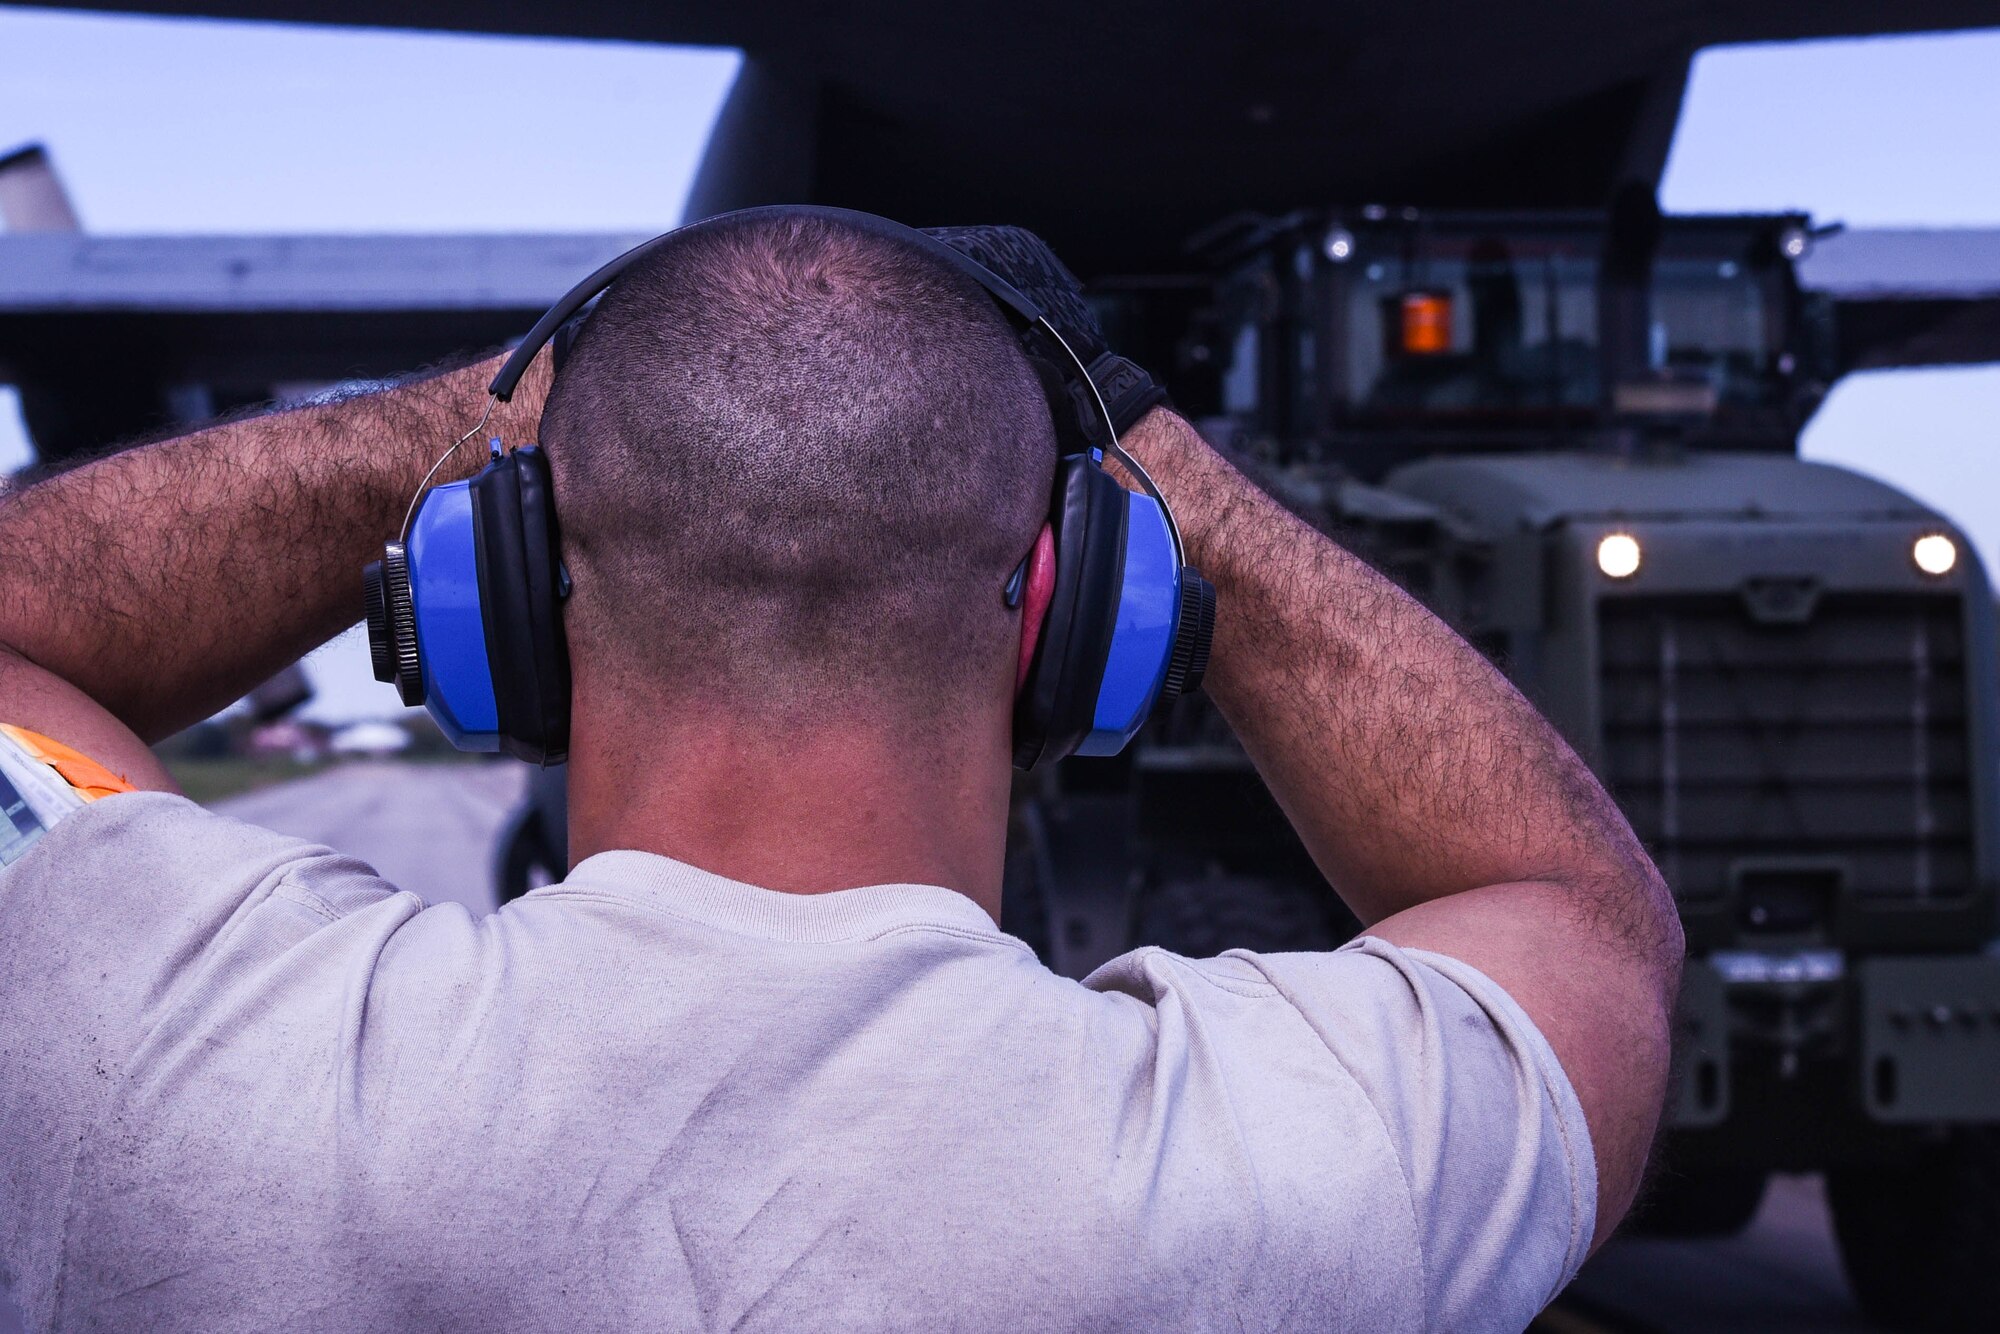 Senior Airman Daniel Rodriguez, 41st Aerial Port Squadron air transportation specialist, guides a Reserve Citizen Airman backing up a vehicle after loading cargo onto a C-130H Hercules aircraft at Keesler Air Force Base, Mississippi, March 4, 2018. The aerial port squadron is made up of several work centers, including passenger service, fleet service, ramp, (the air terminal operations center), load planning, data records, cape forecasting, aerial delivery and cargo processing, and is responsible for getting all the air cargo and passengers on and off the aircraft. (U.S. Air Force photo by Senior Airman Nathan Byrnes)